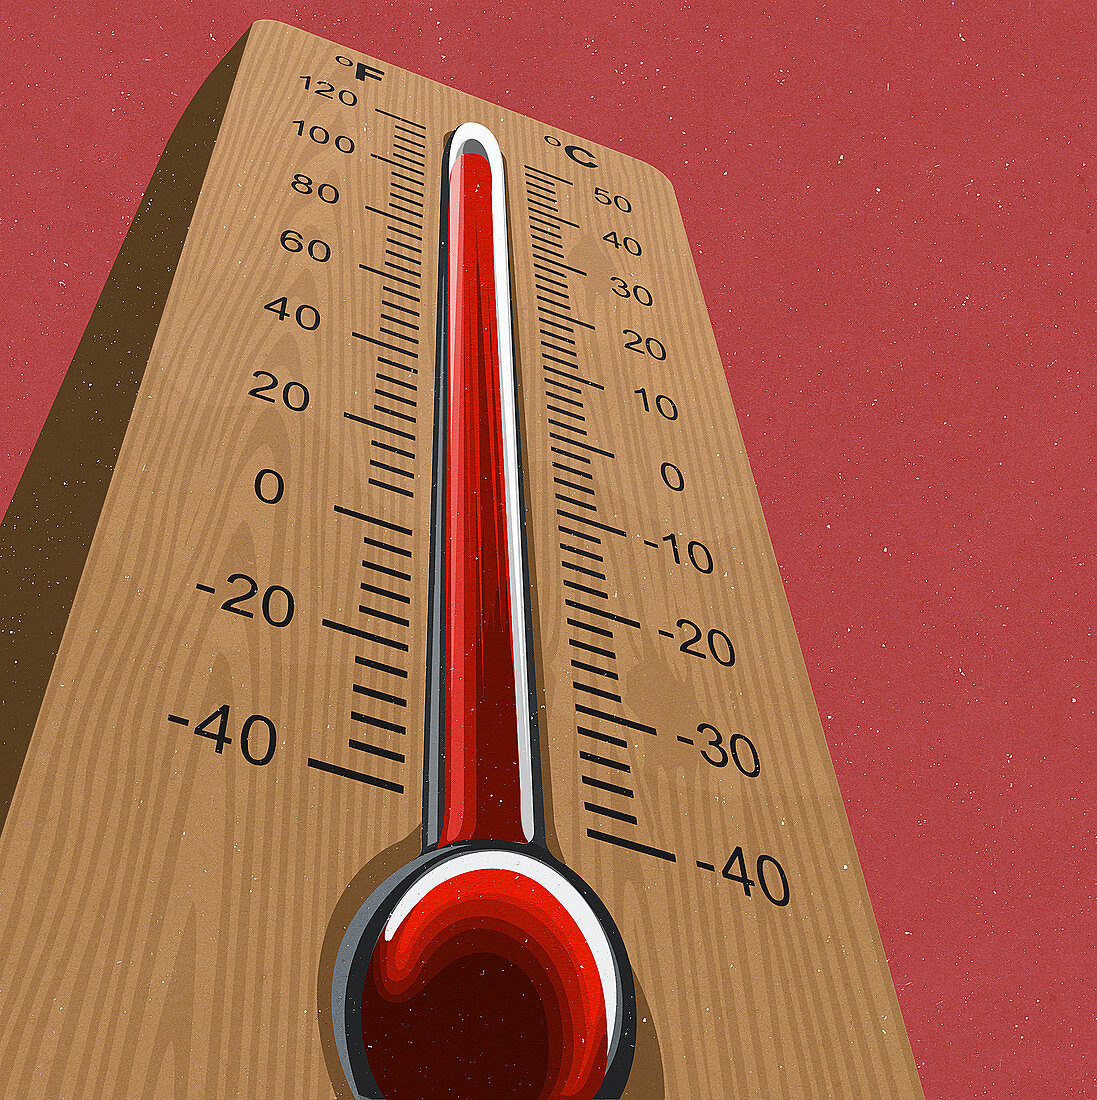 Thermometer at high temperature, illustration